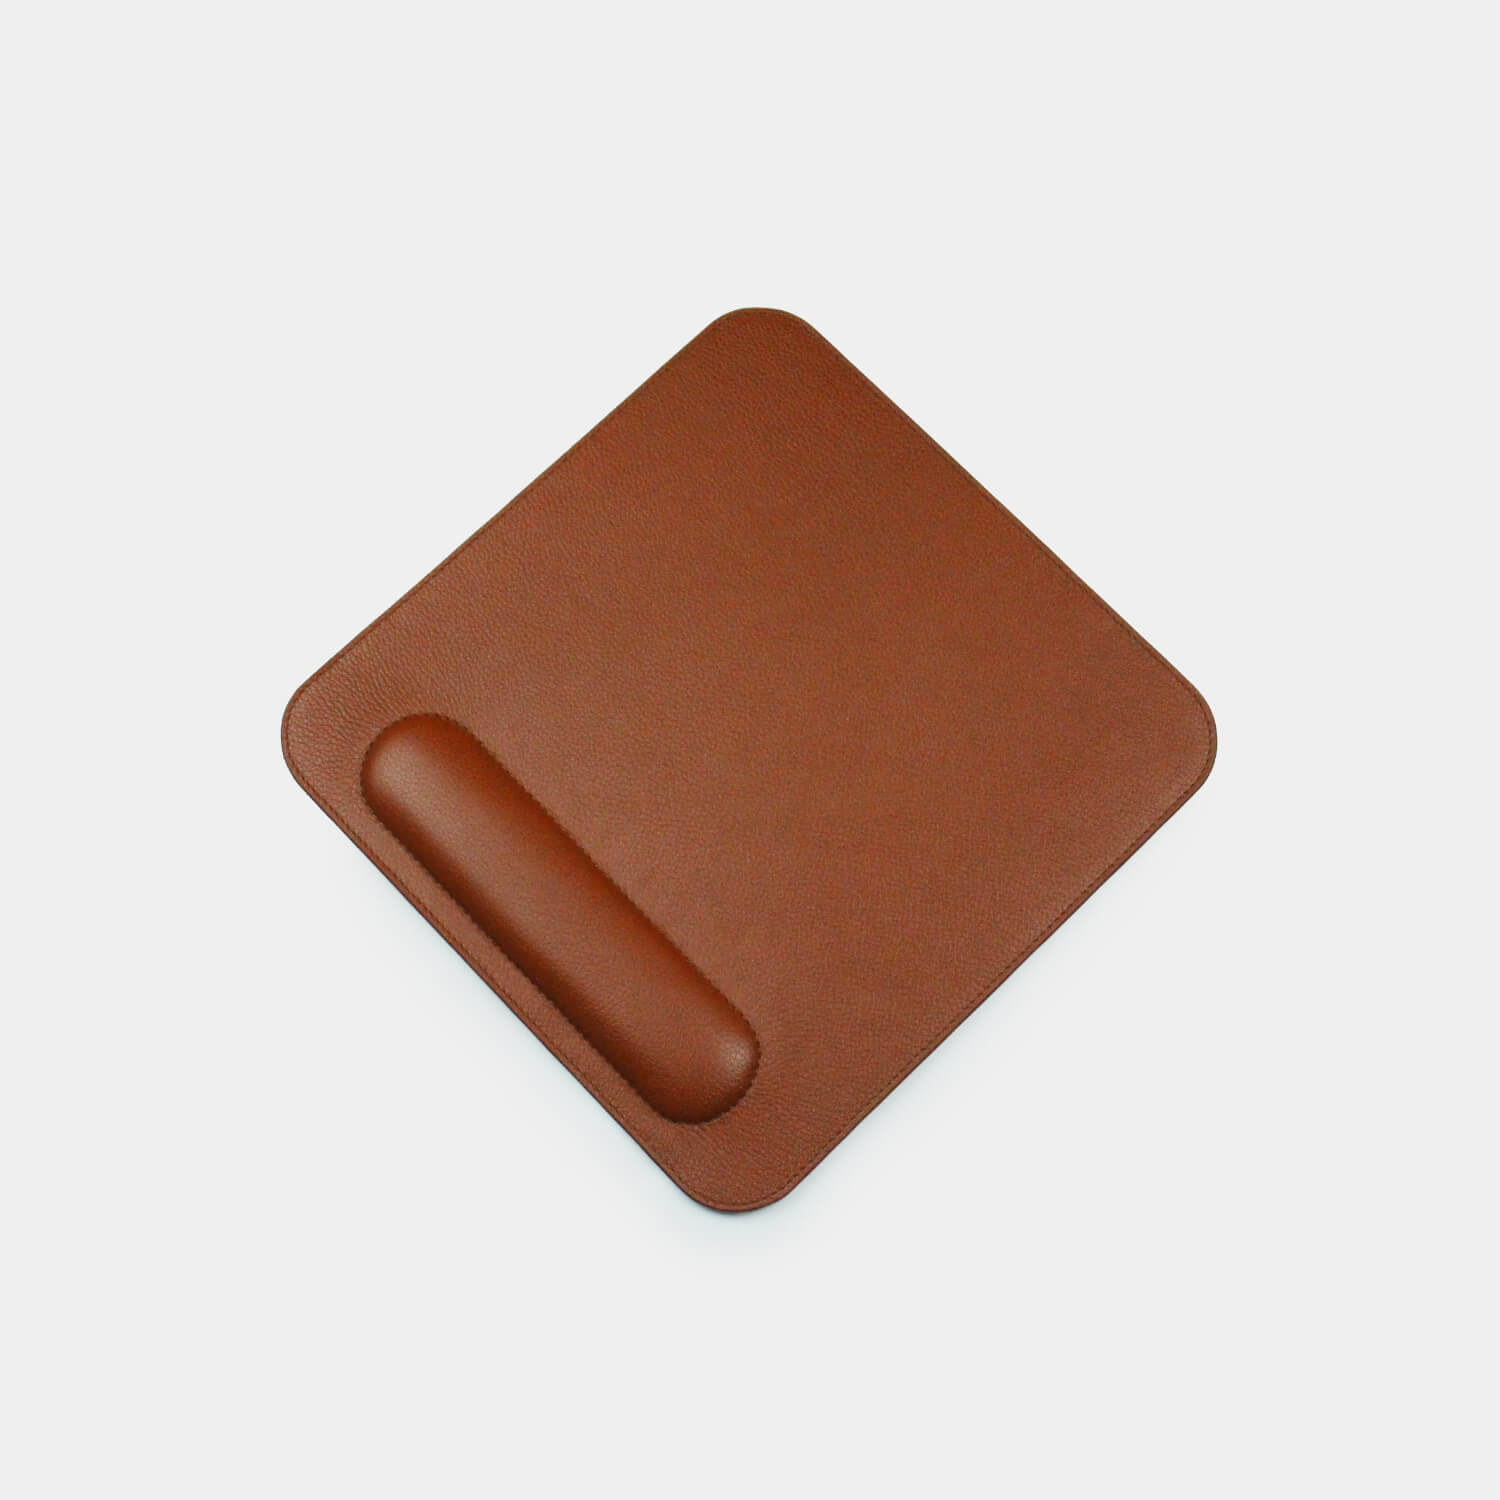 Fine grain leather mouse mat with padded wrist rest for support